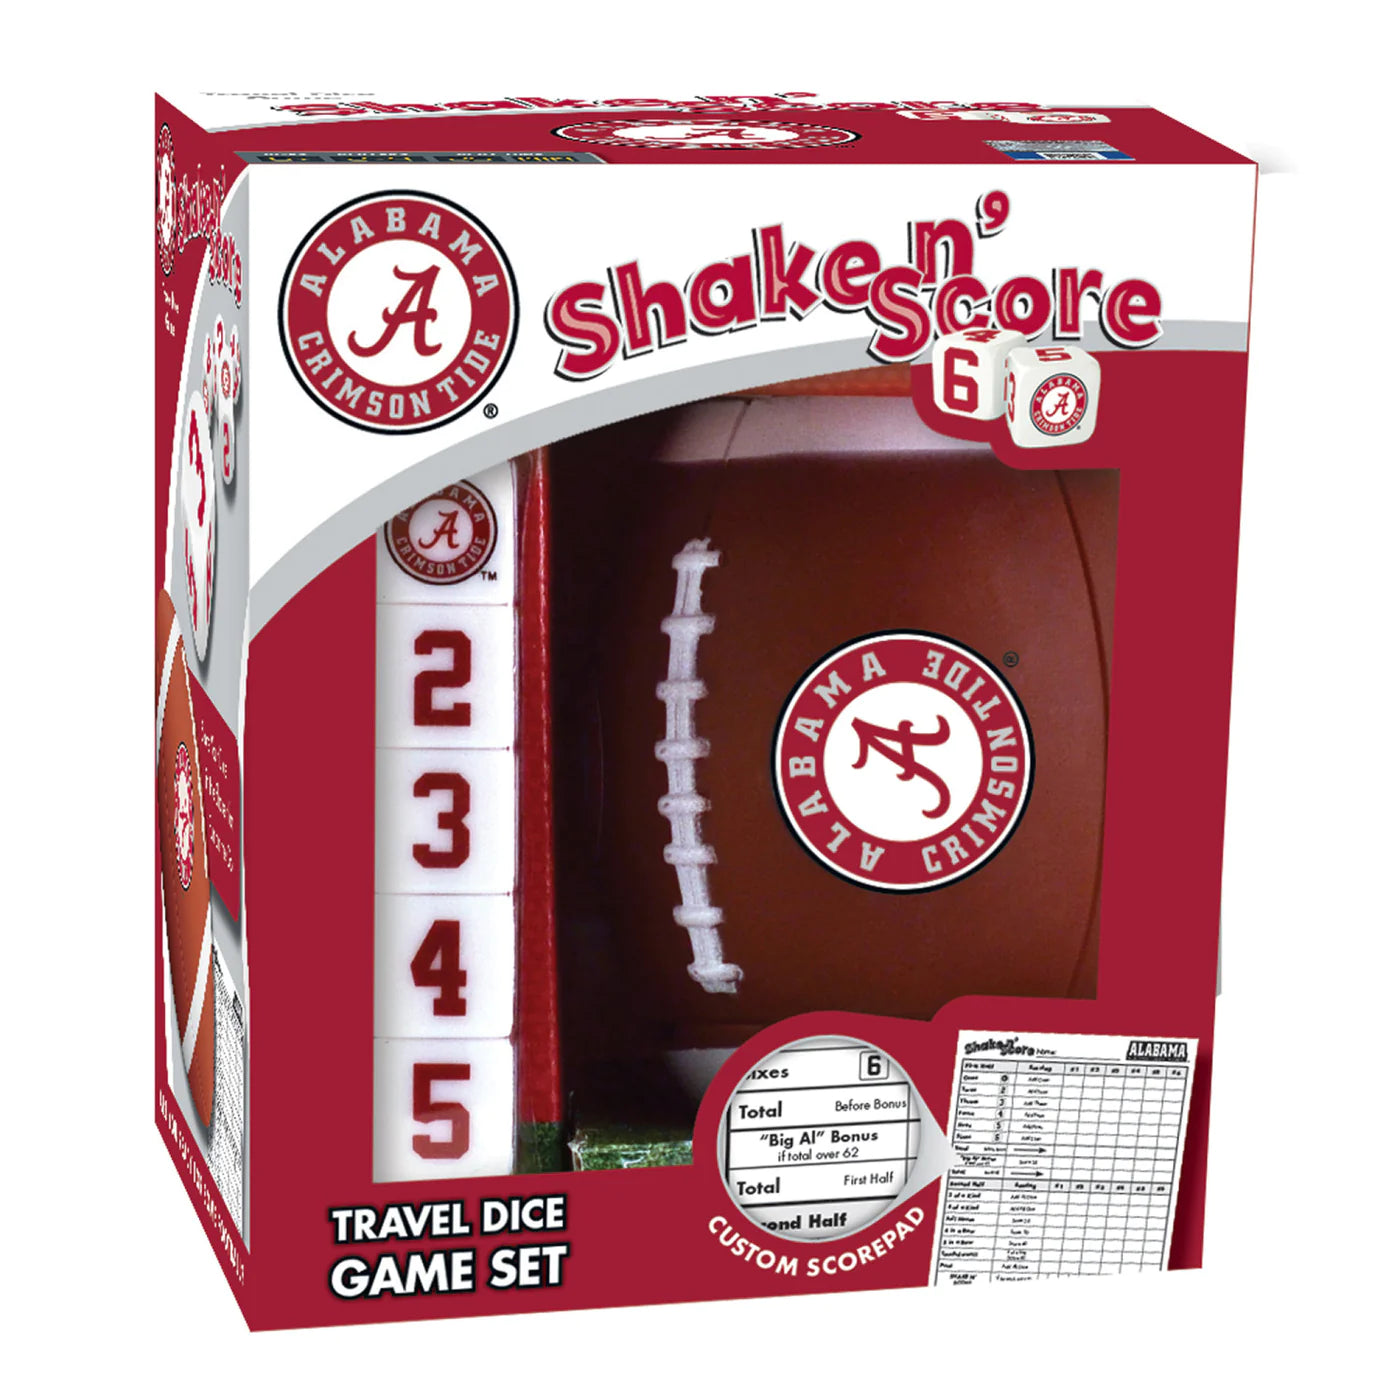 Alabama Crimson Tide Shake n Score Dice Game: Brand new 7-piece set with team-specific football dice cup, 5 dice, scorepad. Suitable for 2+ players, ages 6+.